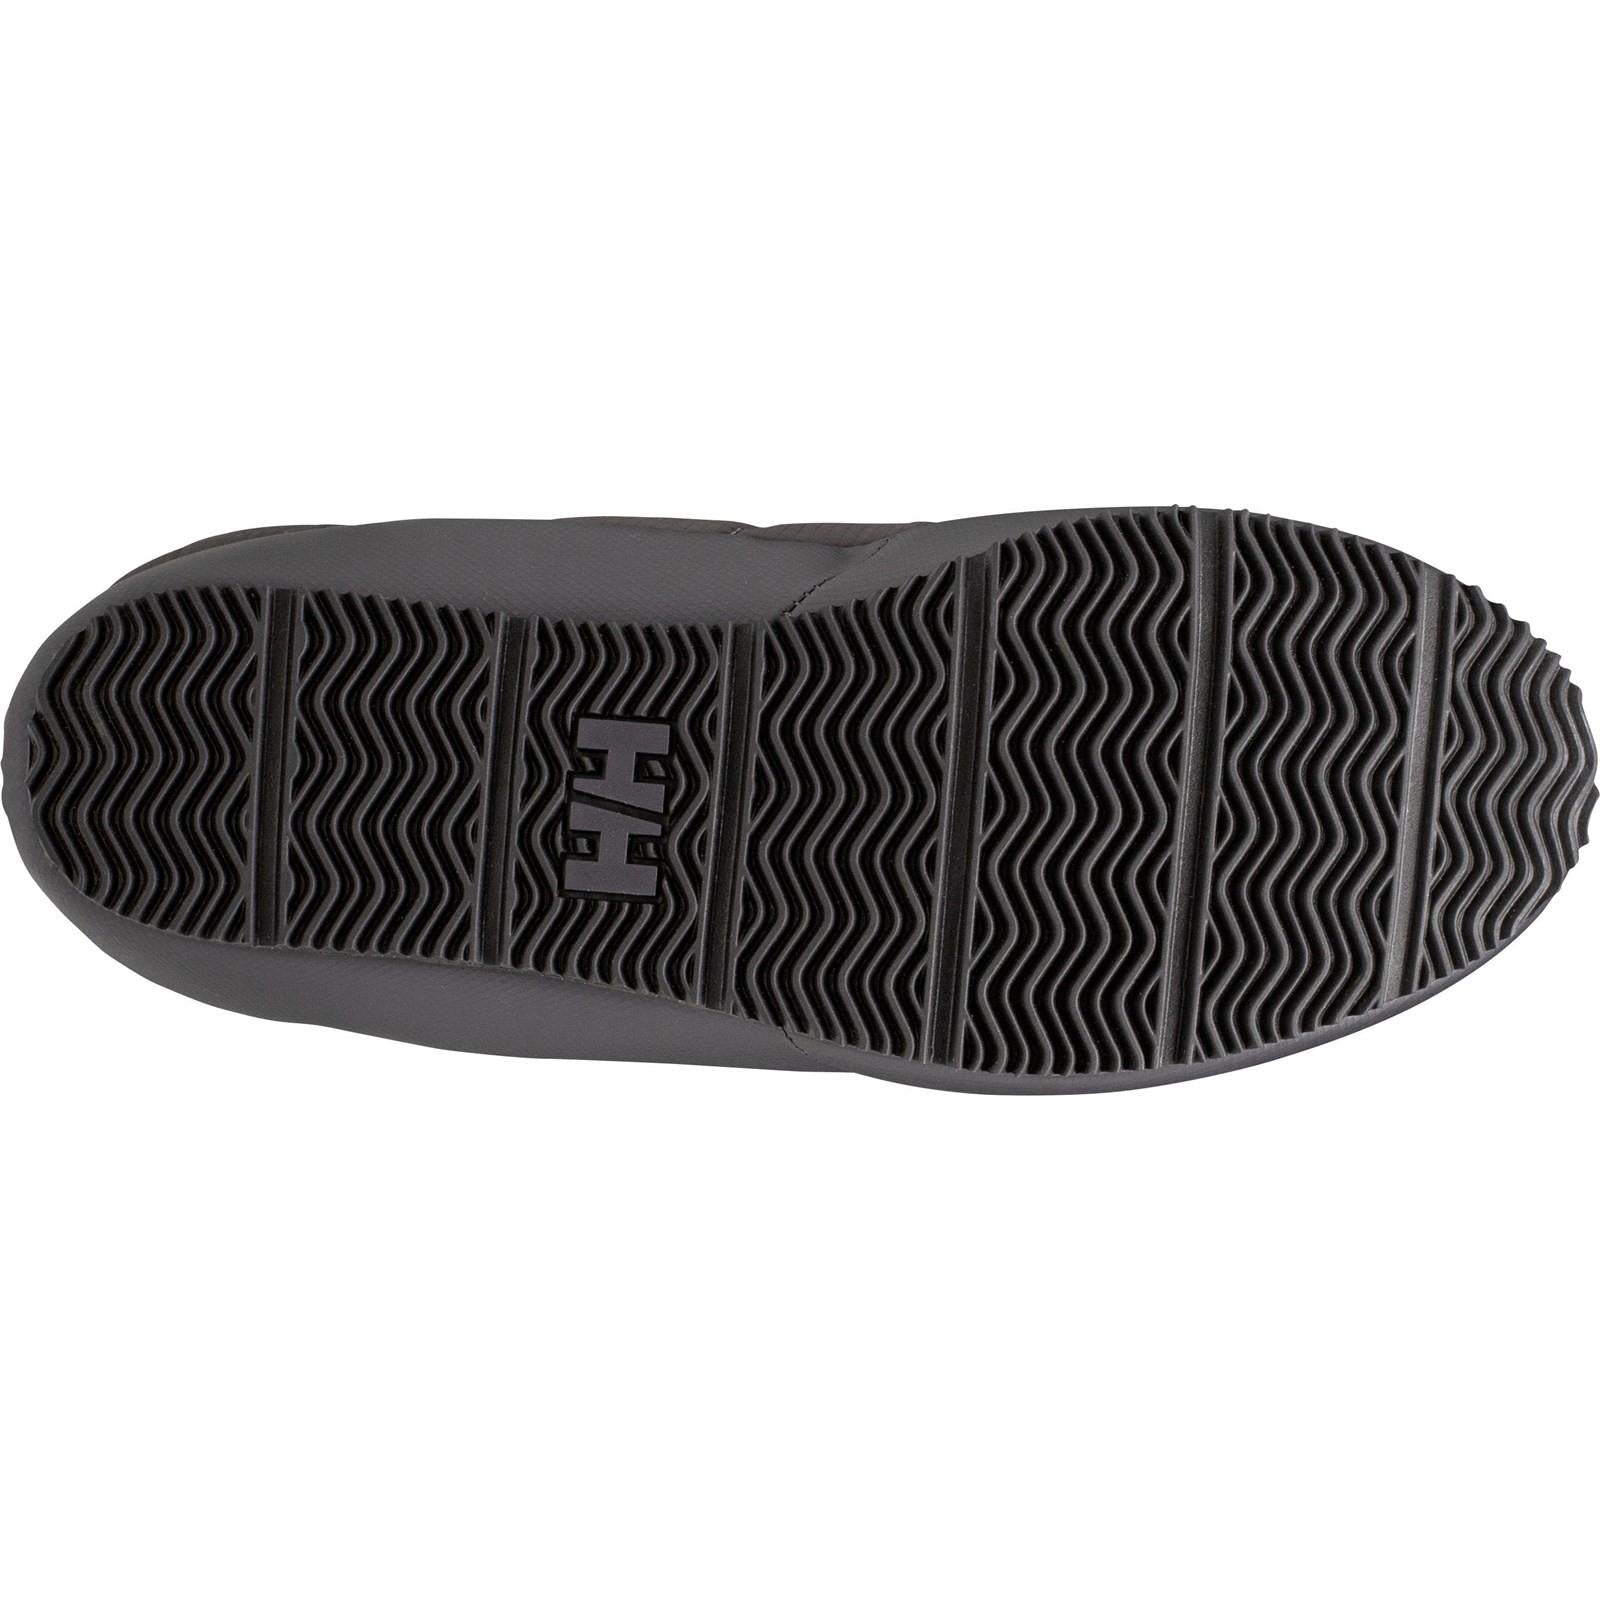 Helly Hansen Cabin Loafer Shoes